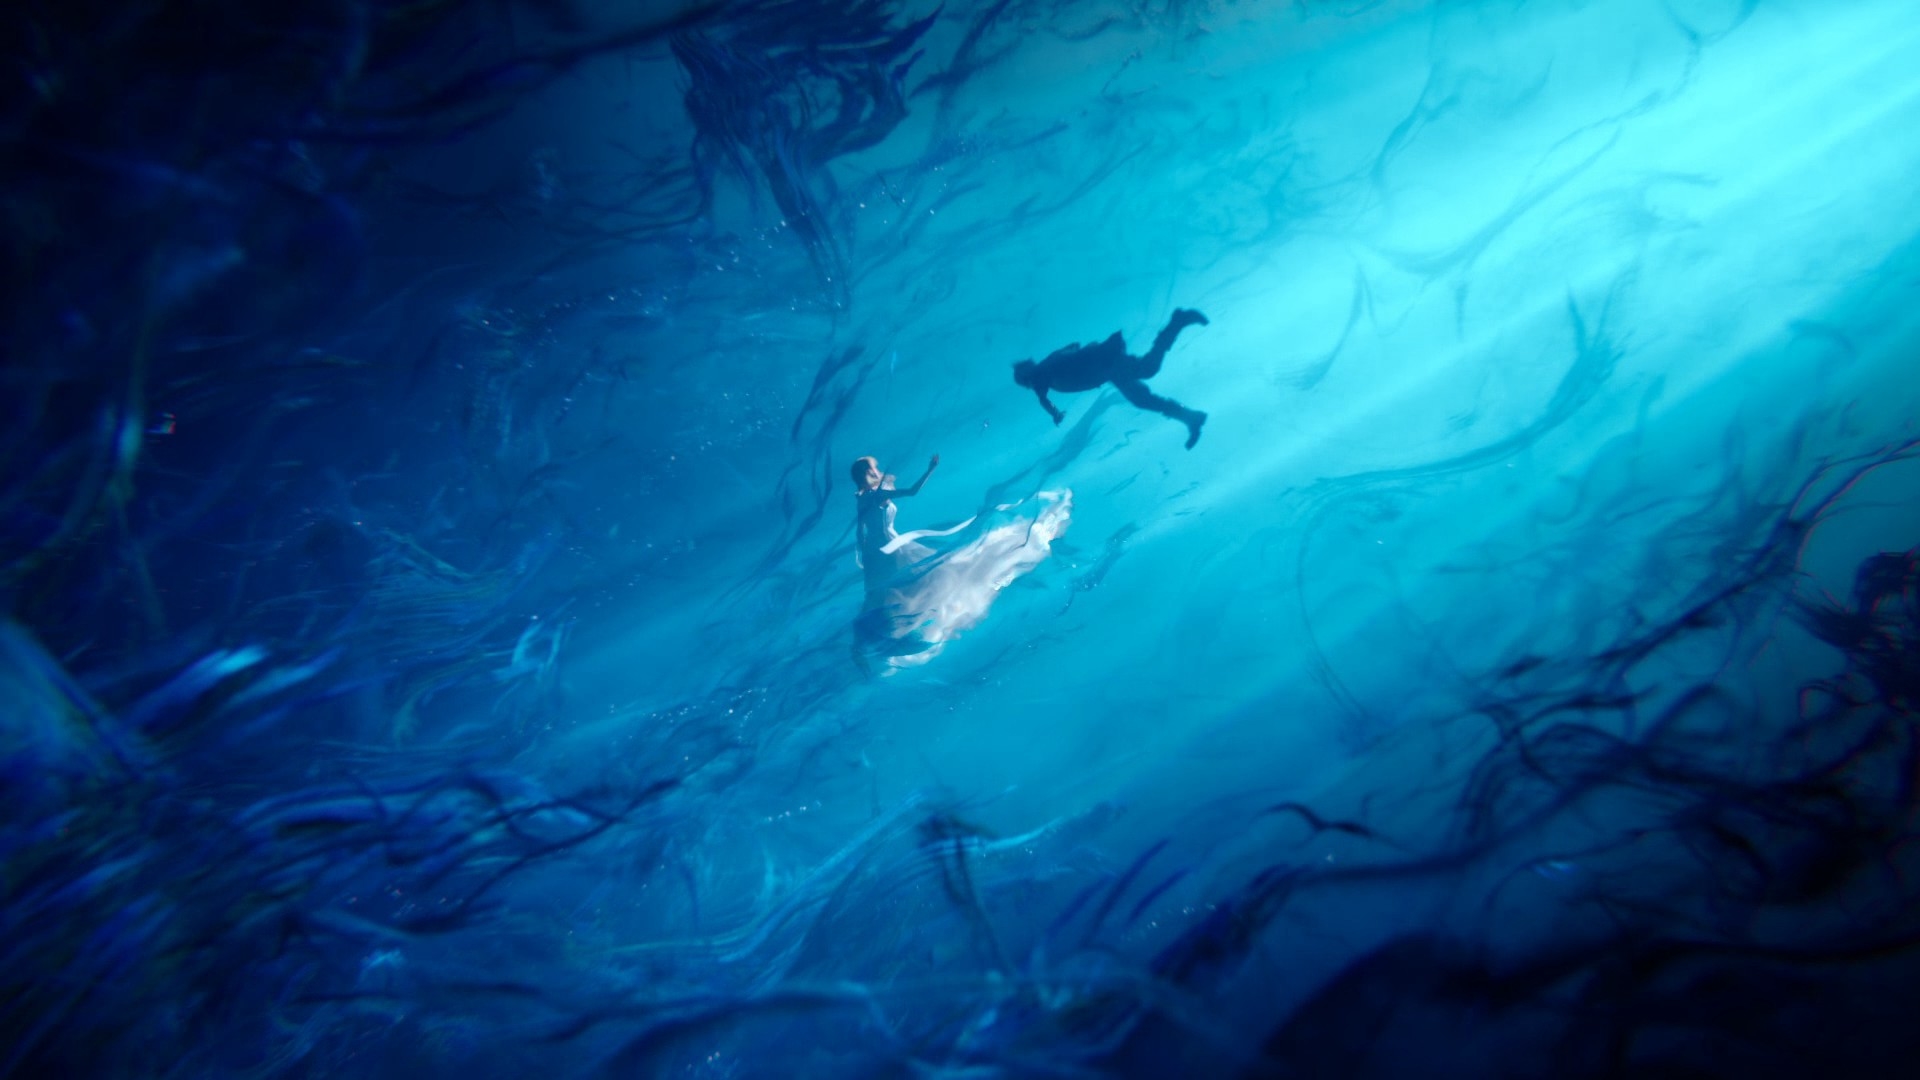 Underwater Final Fantasy 15 Wallpaper Hd Artist 4k Wallpapers Images Photos And Background